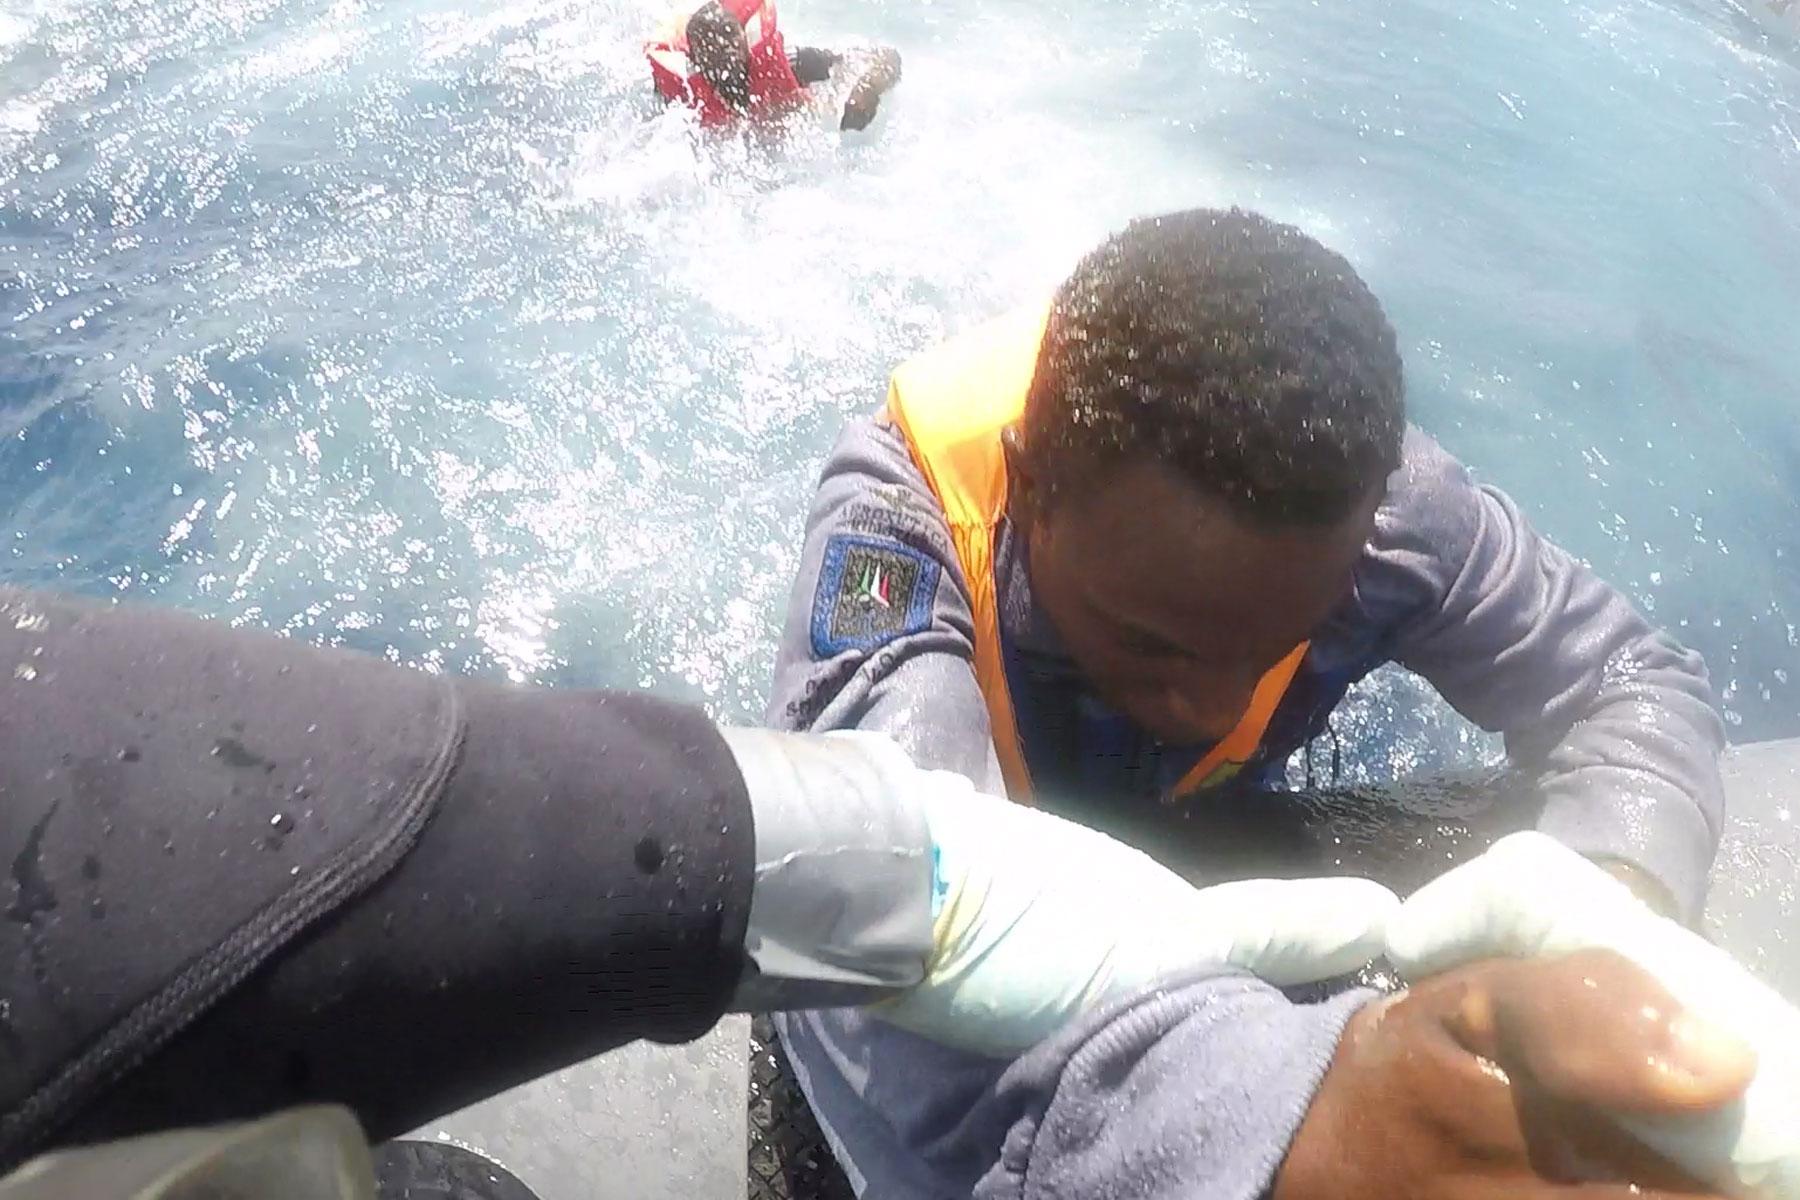 More than 250 migrants have drowned since the beginning of 2019 as they attempted to cross the Mediterranean Sea to escape poverty and violence. Photo: Ãglaigh na hÃireann